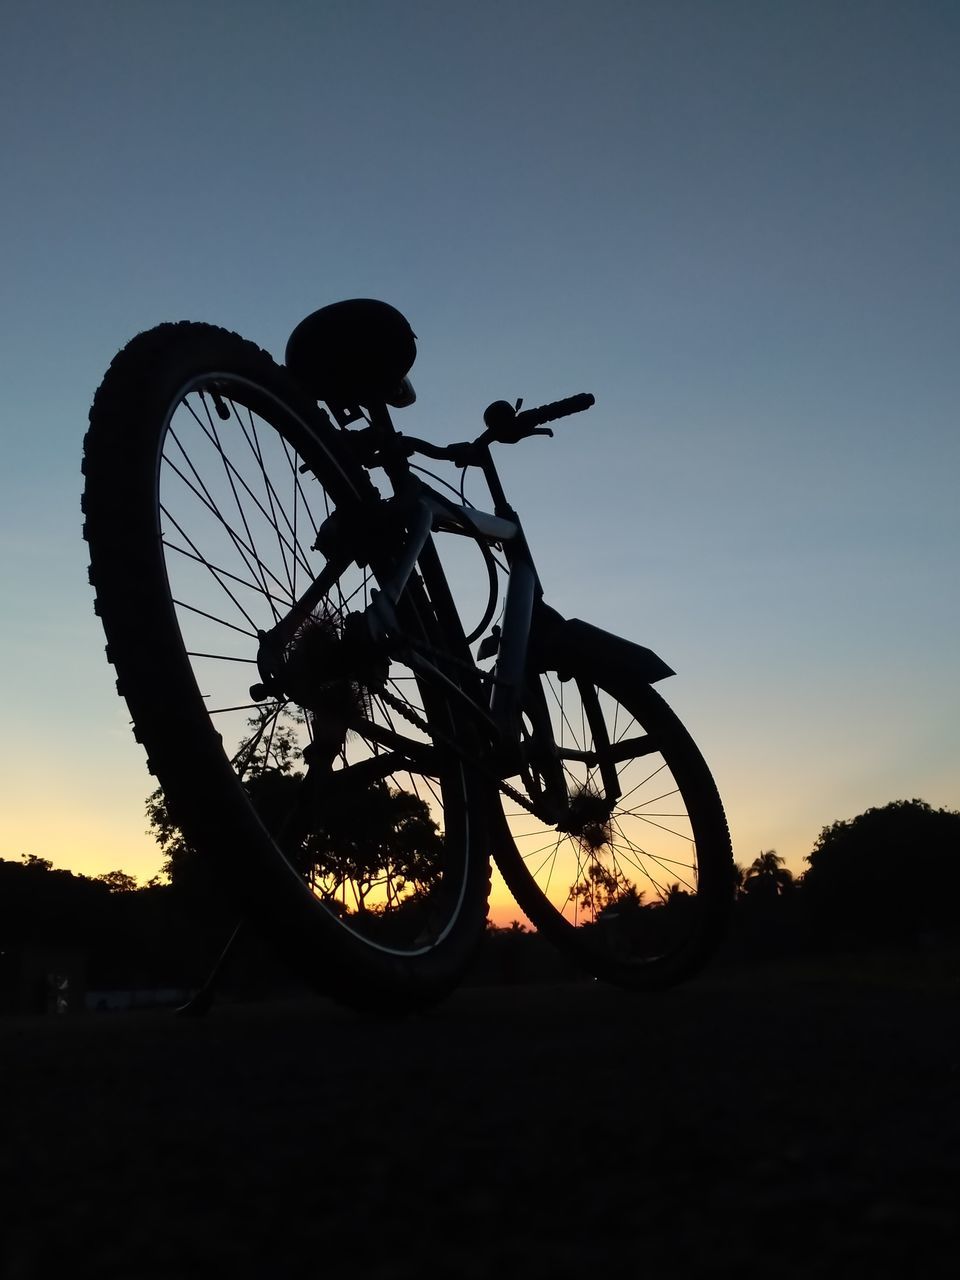 silhouette, transportation, sky, bicycle, nature, vehicle, sunset, sports equipment, mountain bike, sports, mode of transportation, activity, wheel, dusk, cycle sport, copy space, cycling, mountain biking, outdoors, one person, land, clear sky, motion, sunlight, back lit, pedal, land vehicle